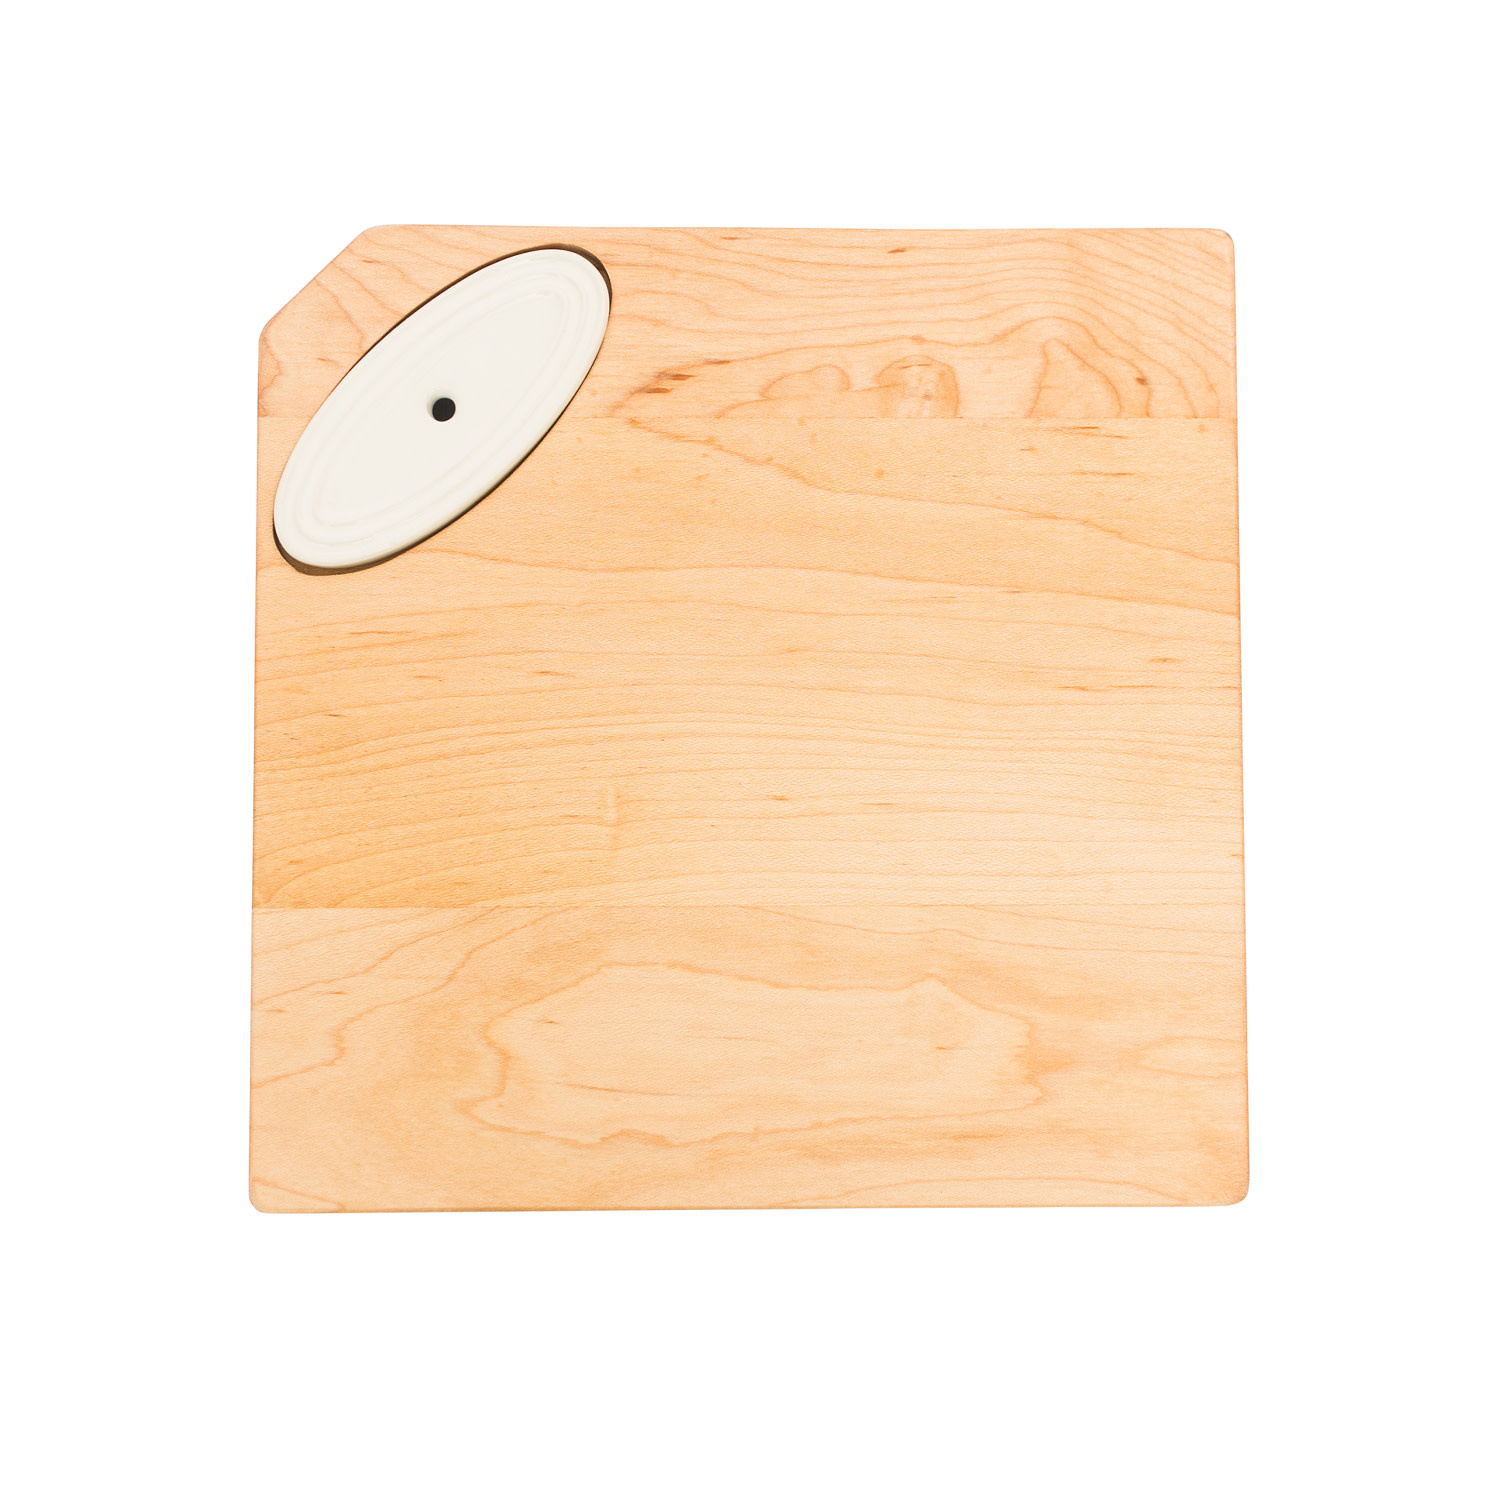 nora fleming maple wood cheese board (CH4) nora fleming